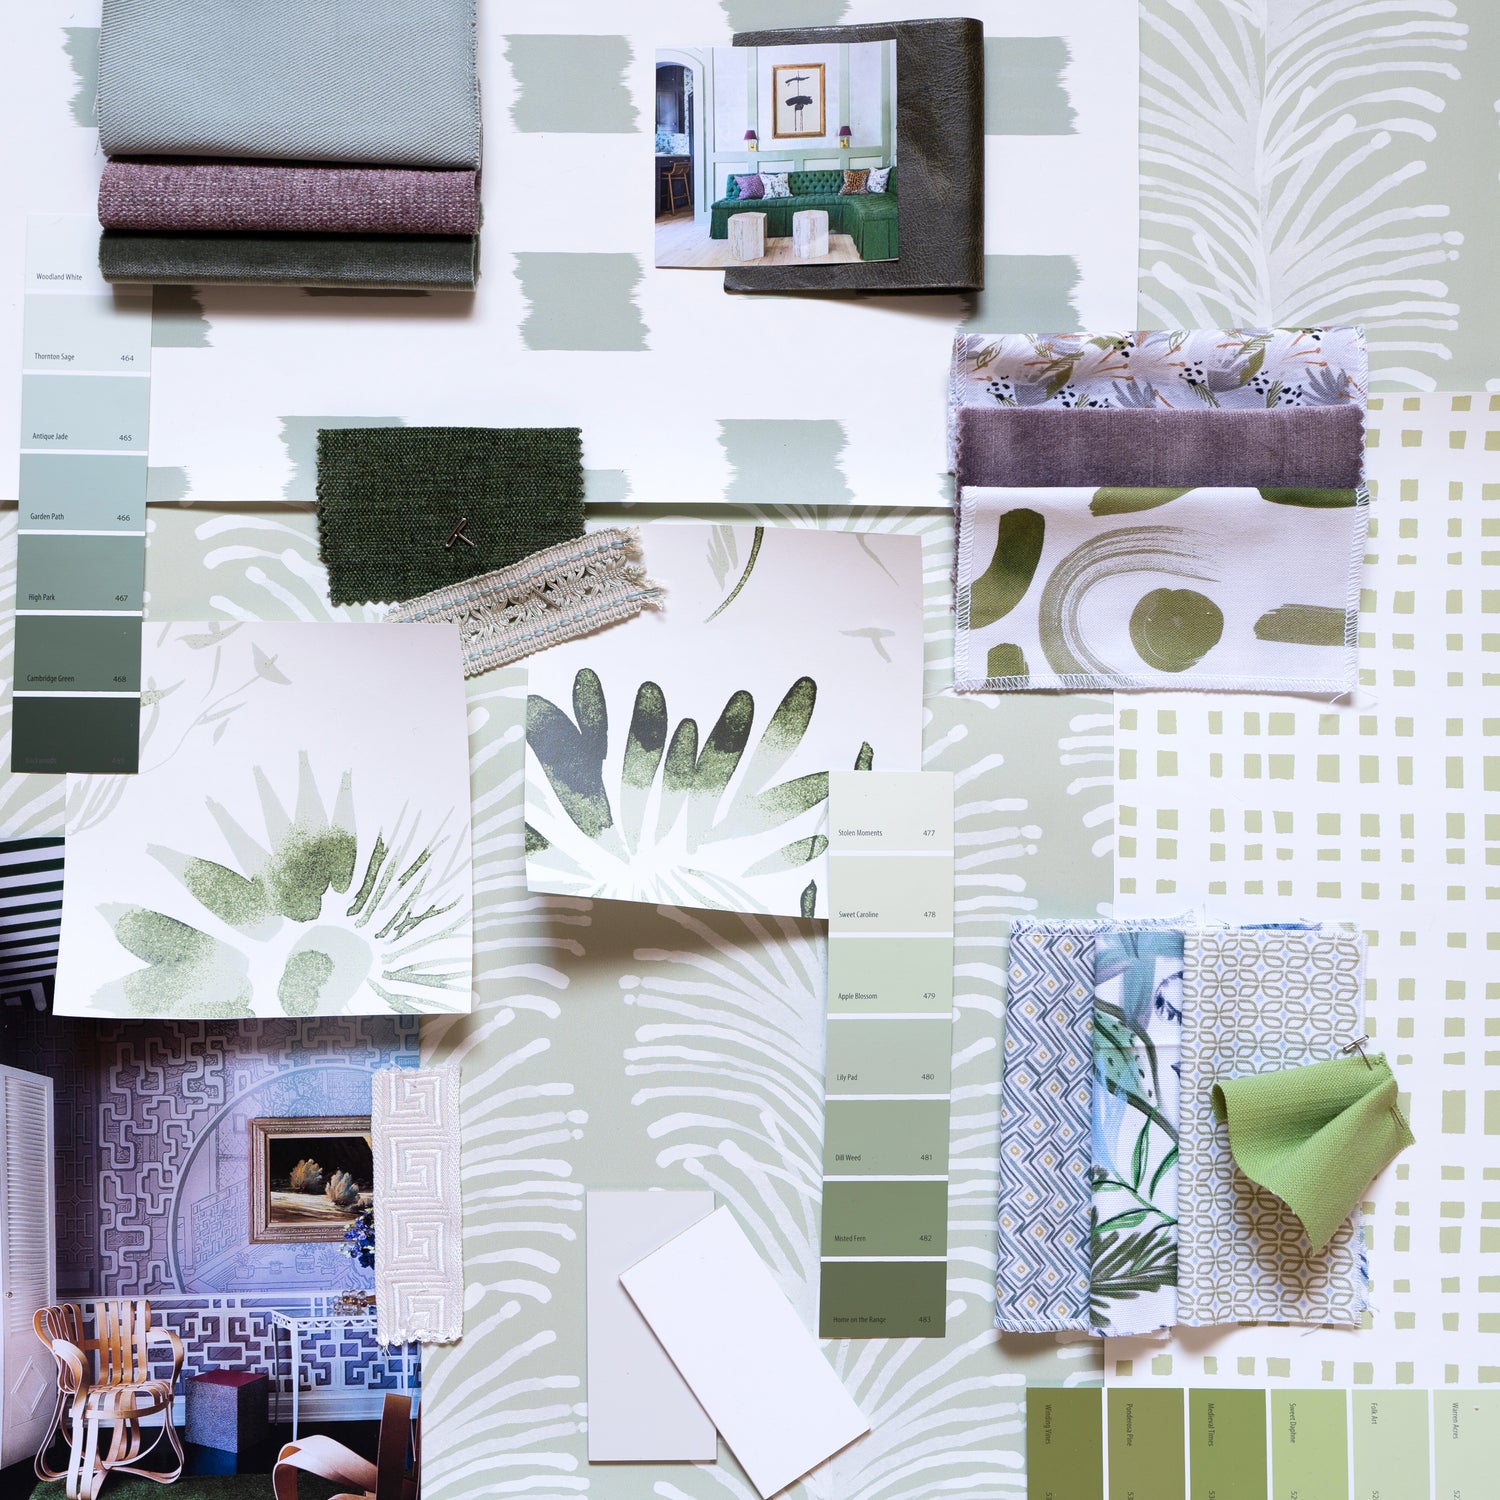 15 Sage Green Paint Colors You'll Love - Jenna Kate at Home